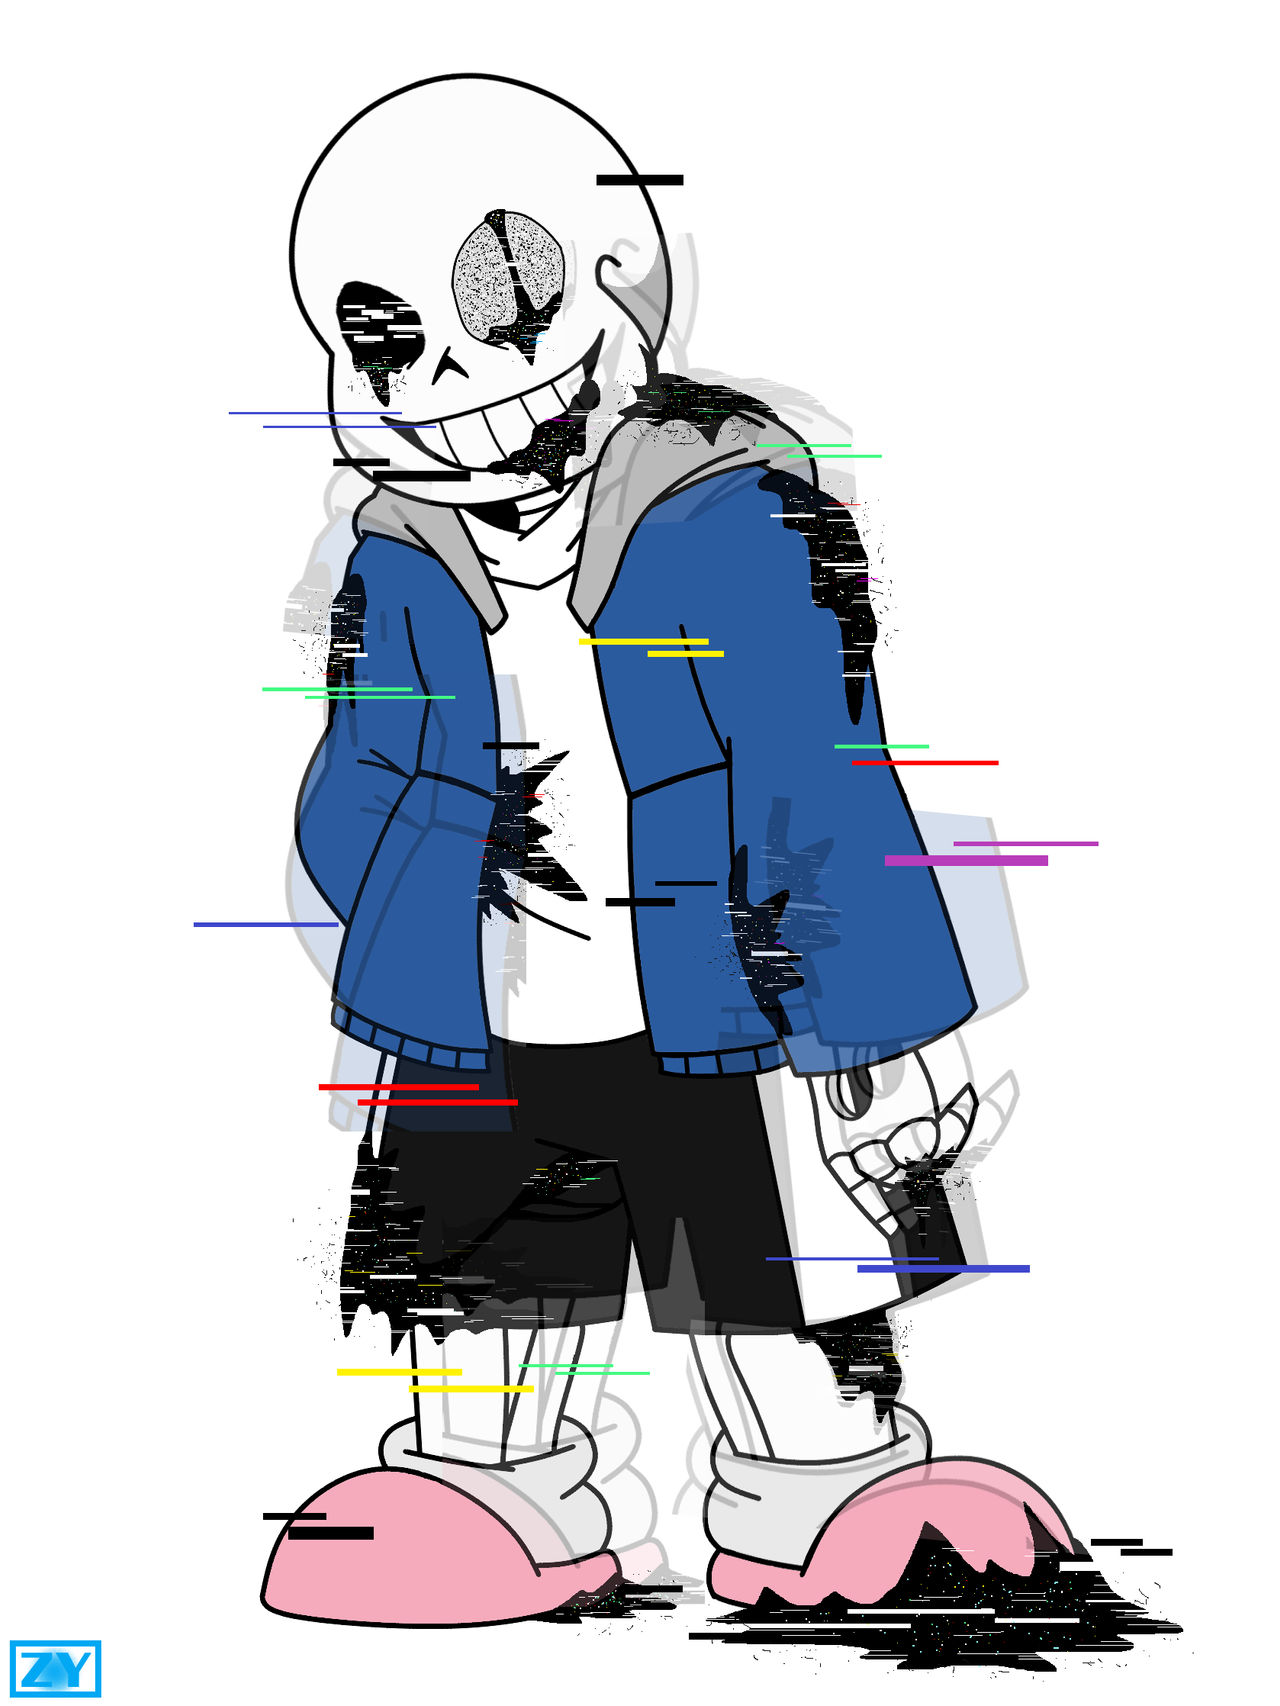 Come learn with us (Pibby!Sans AU)